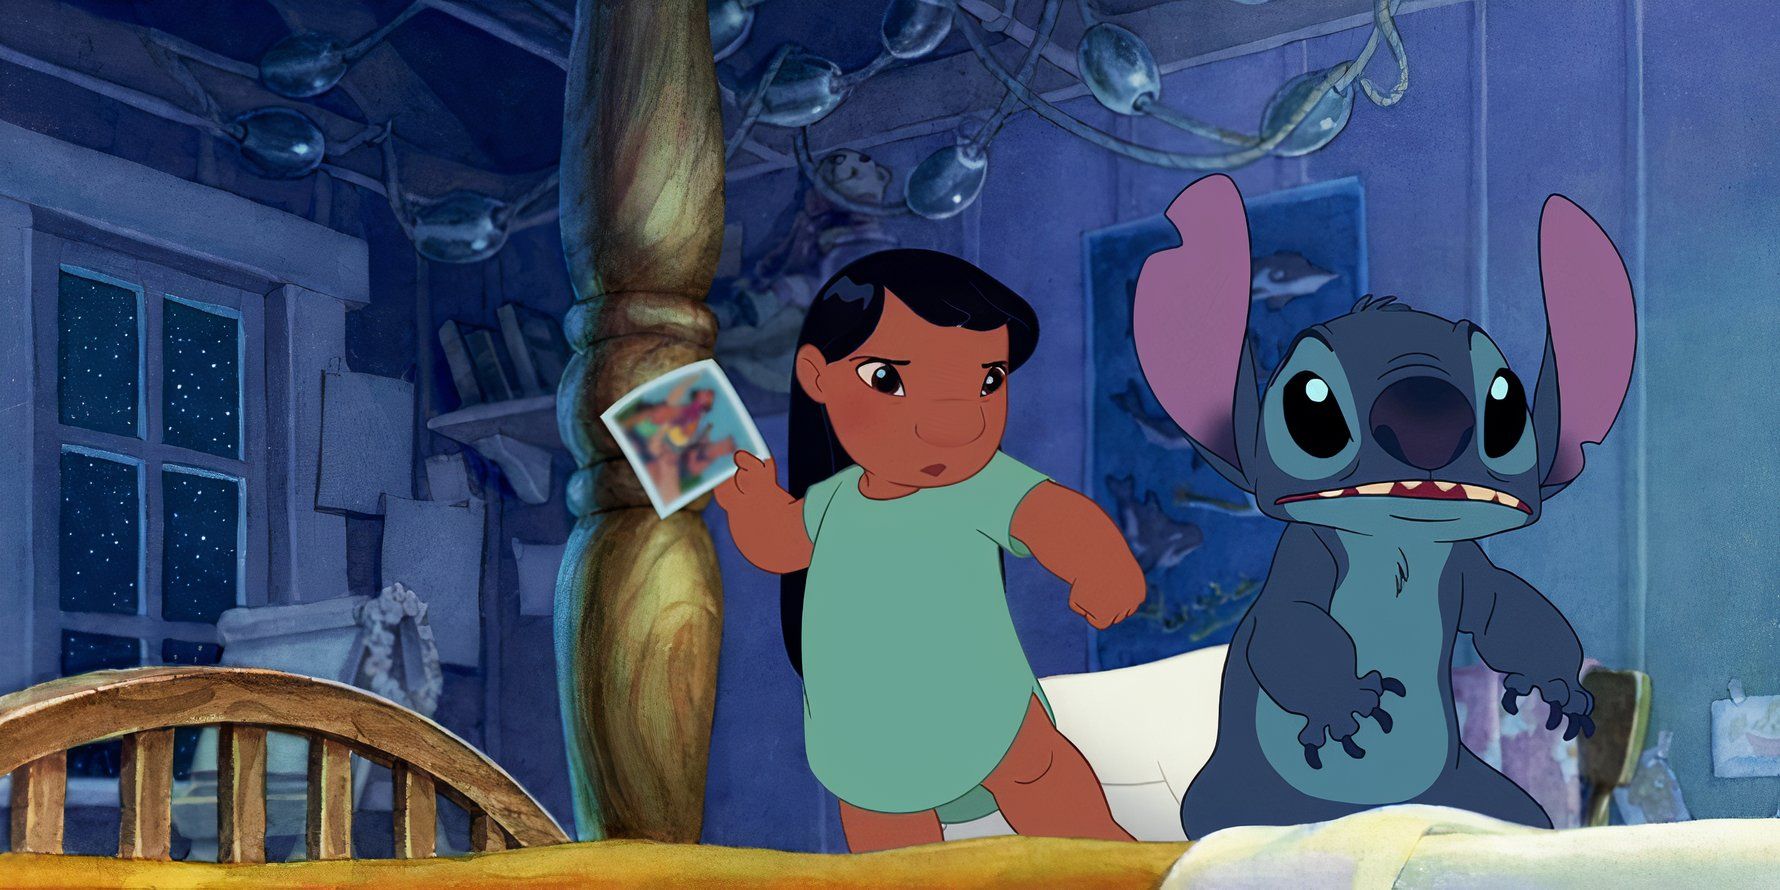 Lilo and Stitch Lilo angry at Stitch holding her parents' photo